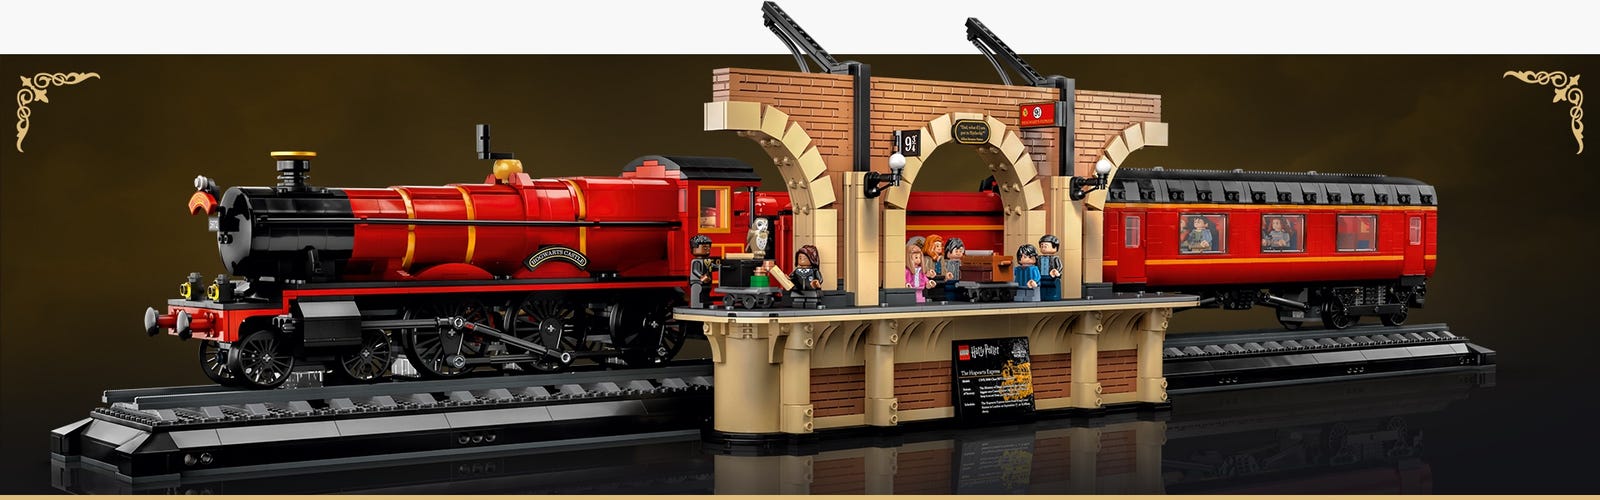 The Magical LEGO Harry Potter Hogwarts Express Is Still 30% Off After Cyber  Monday - IGN